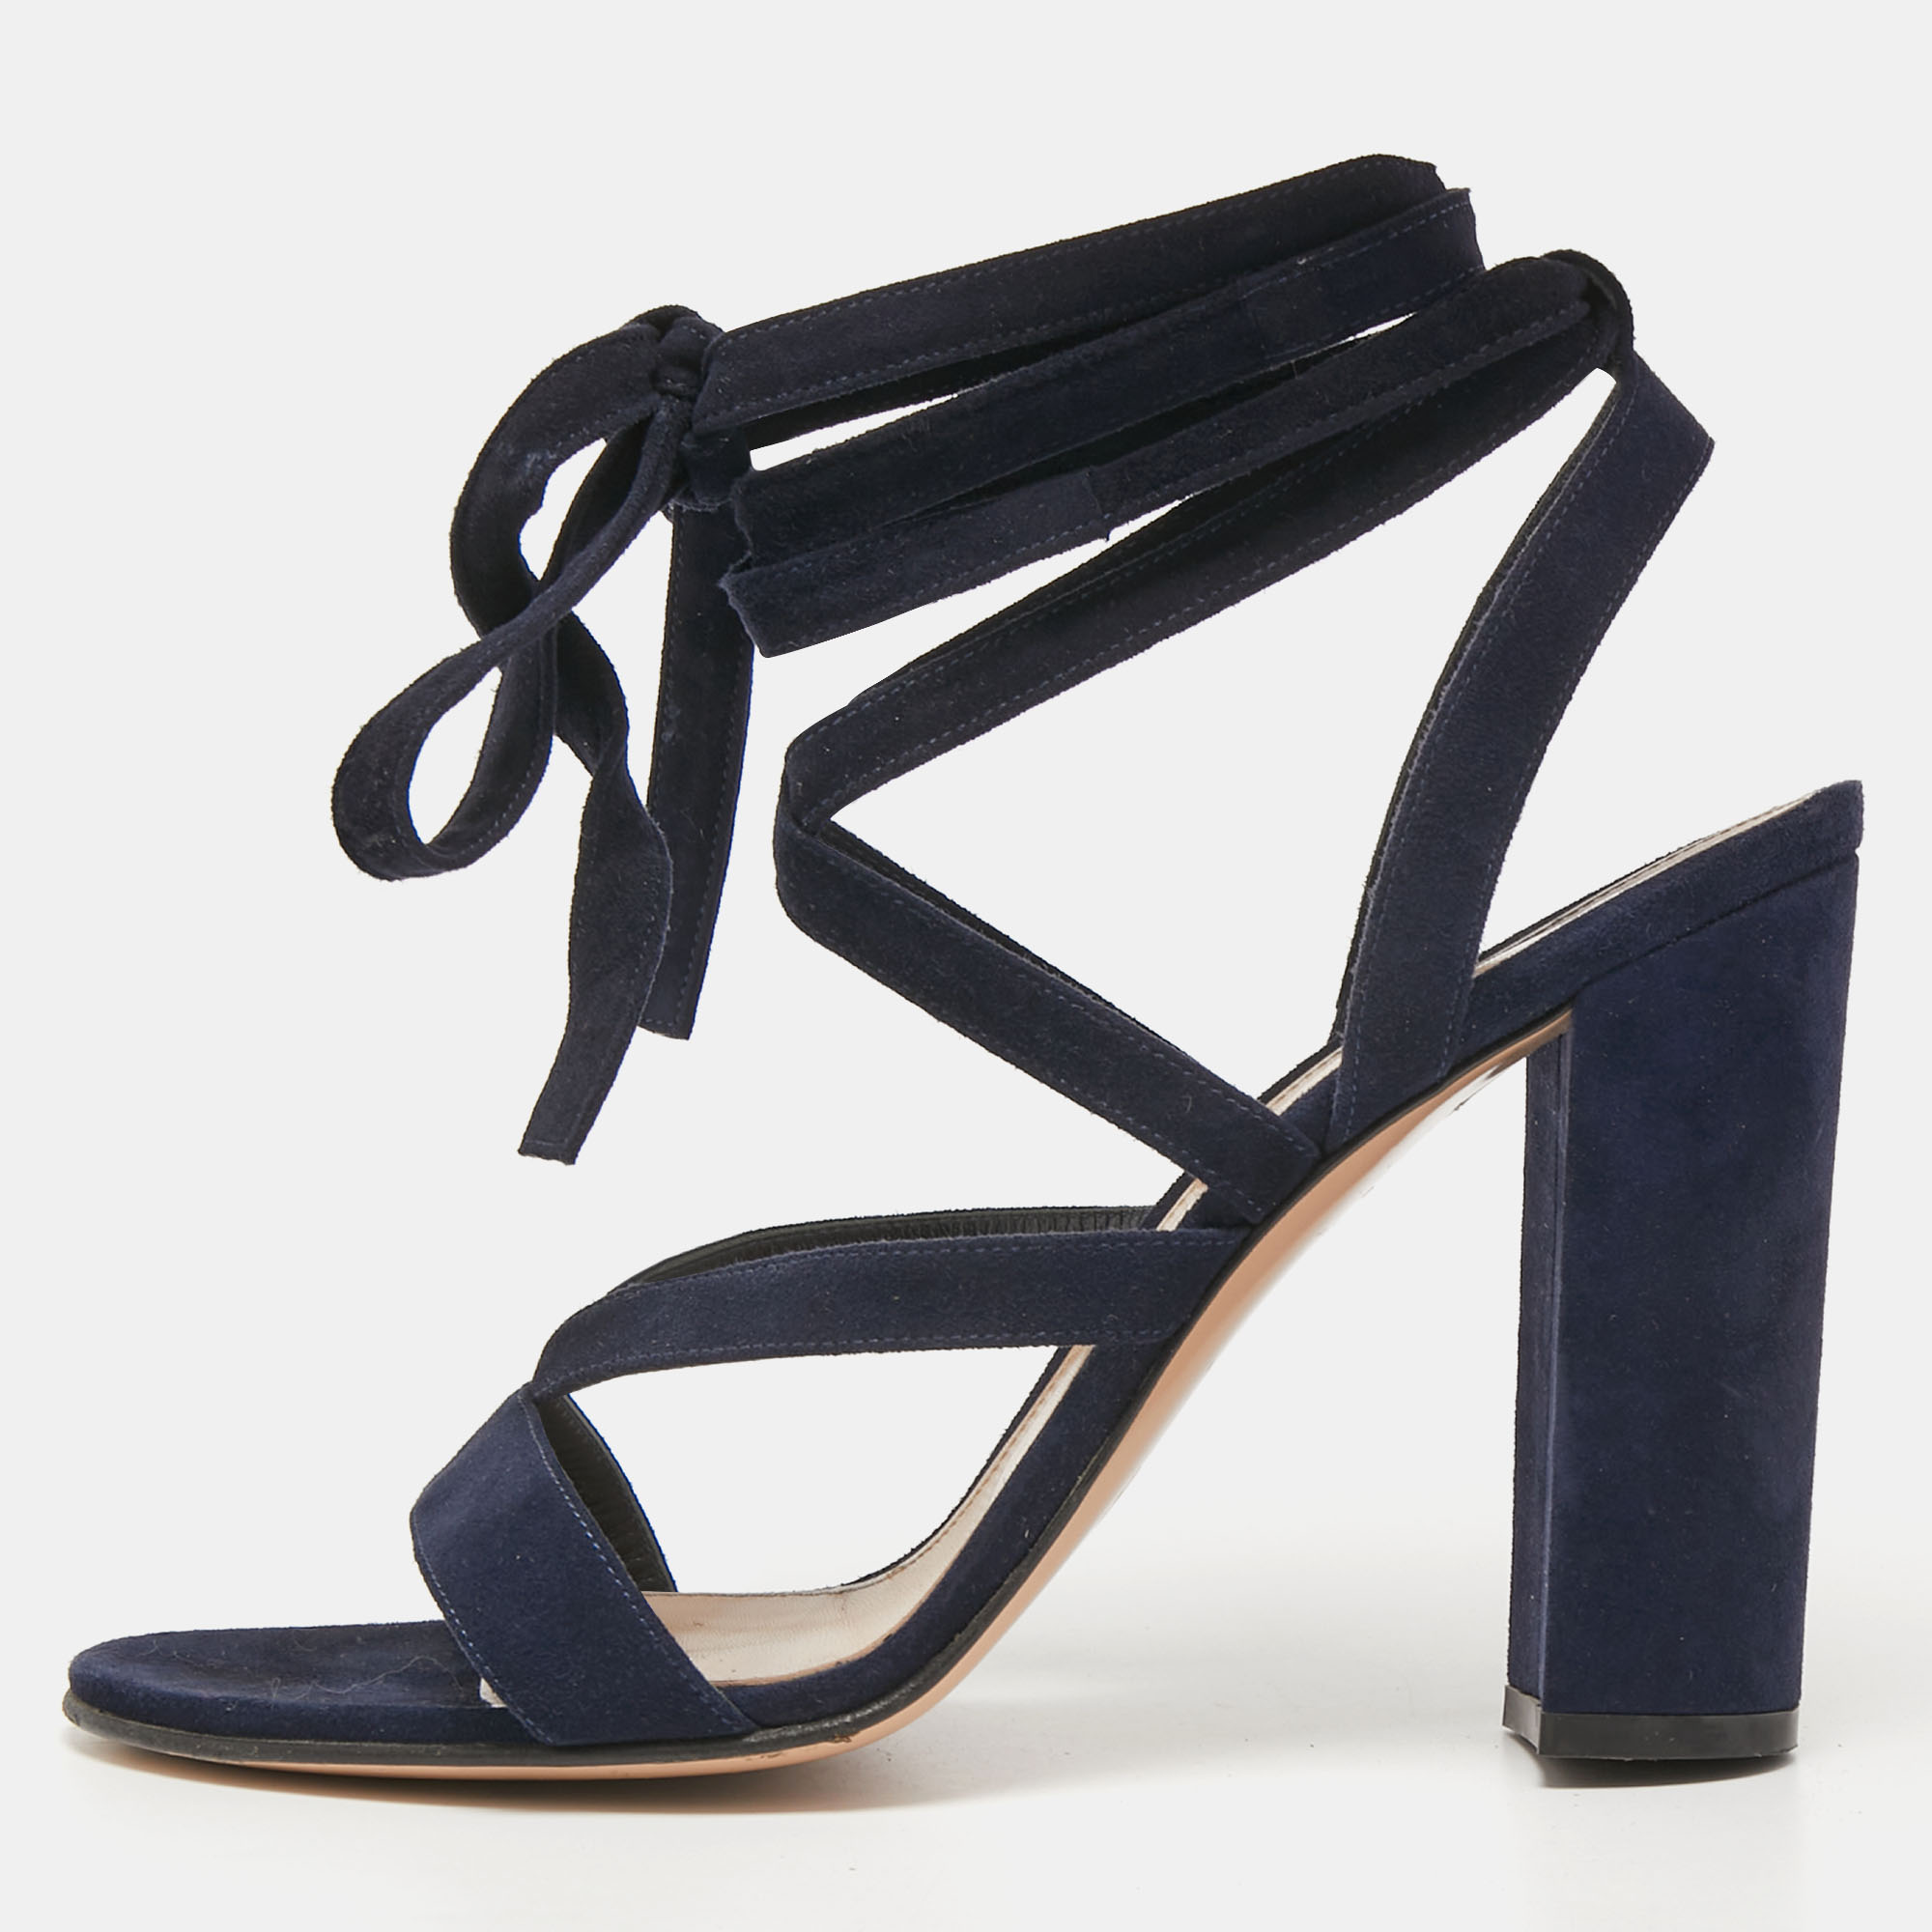 Gianvito rossi navy blue suede ankle wrap sandals size 40